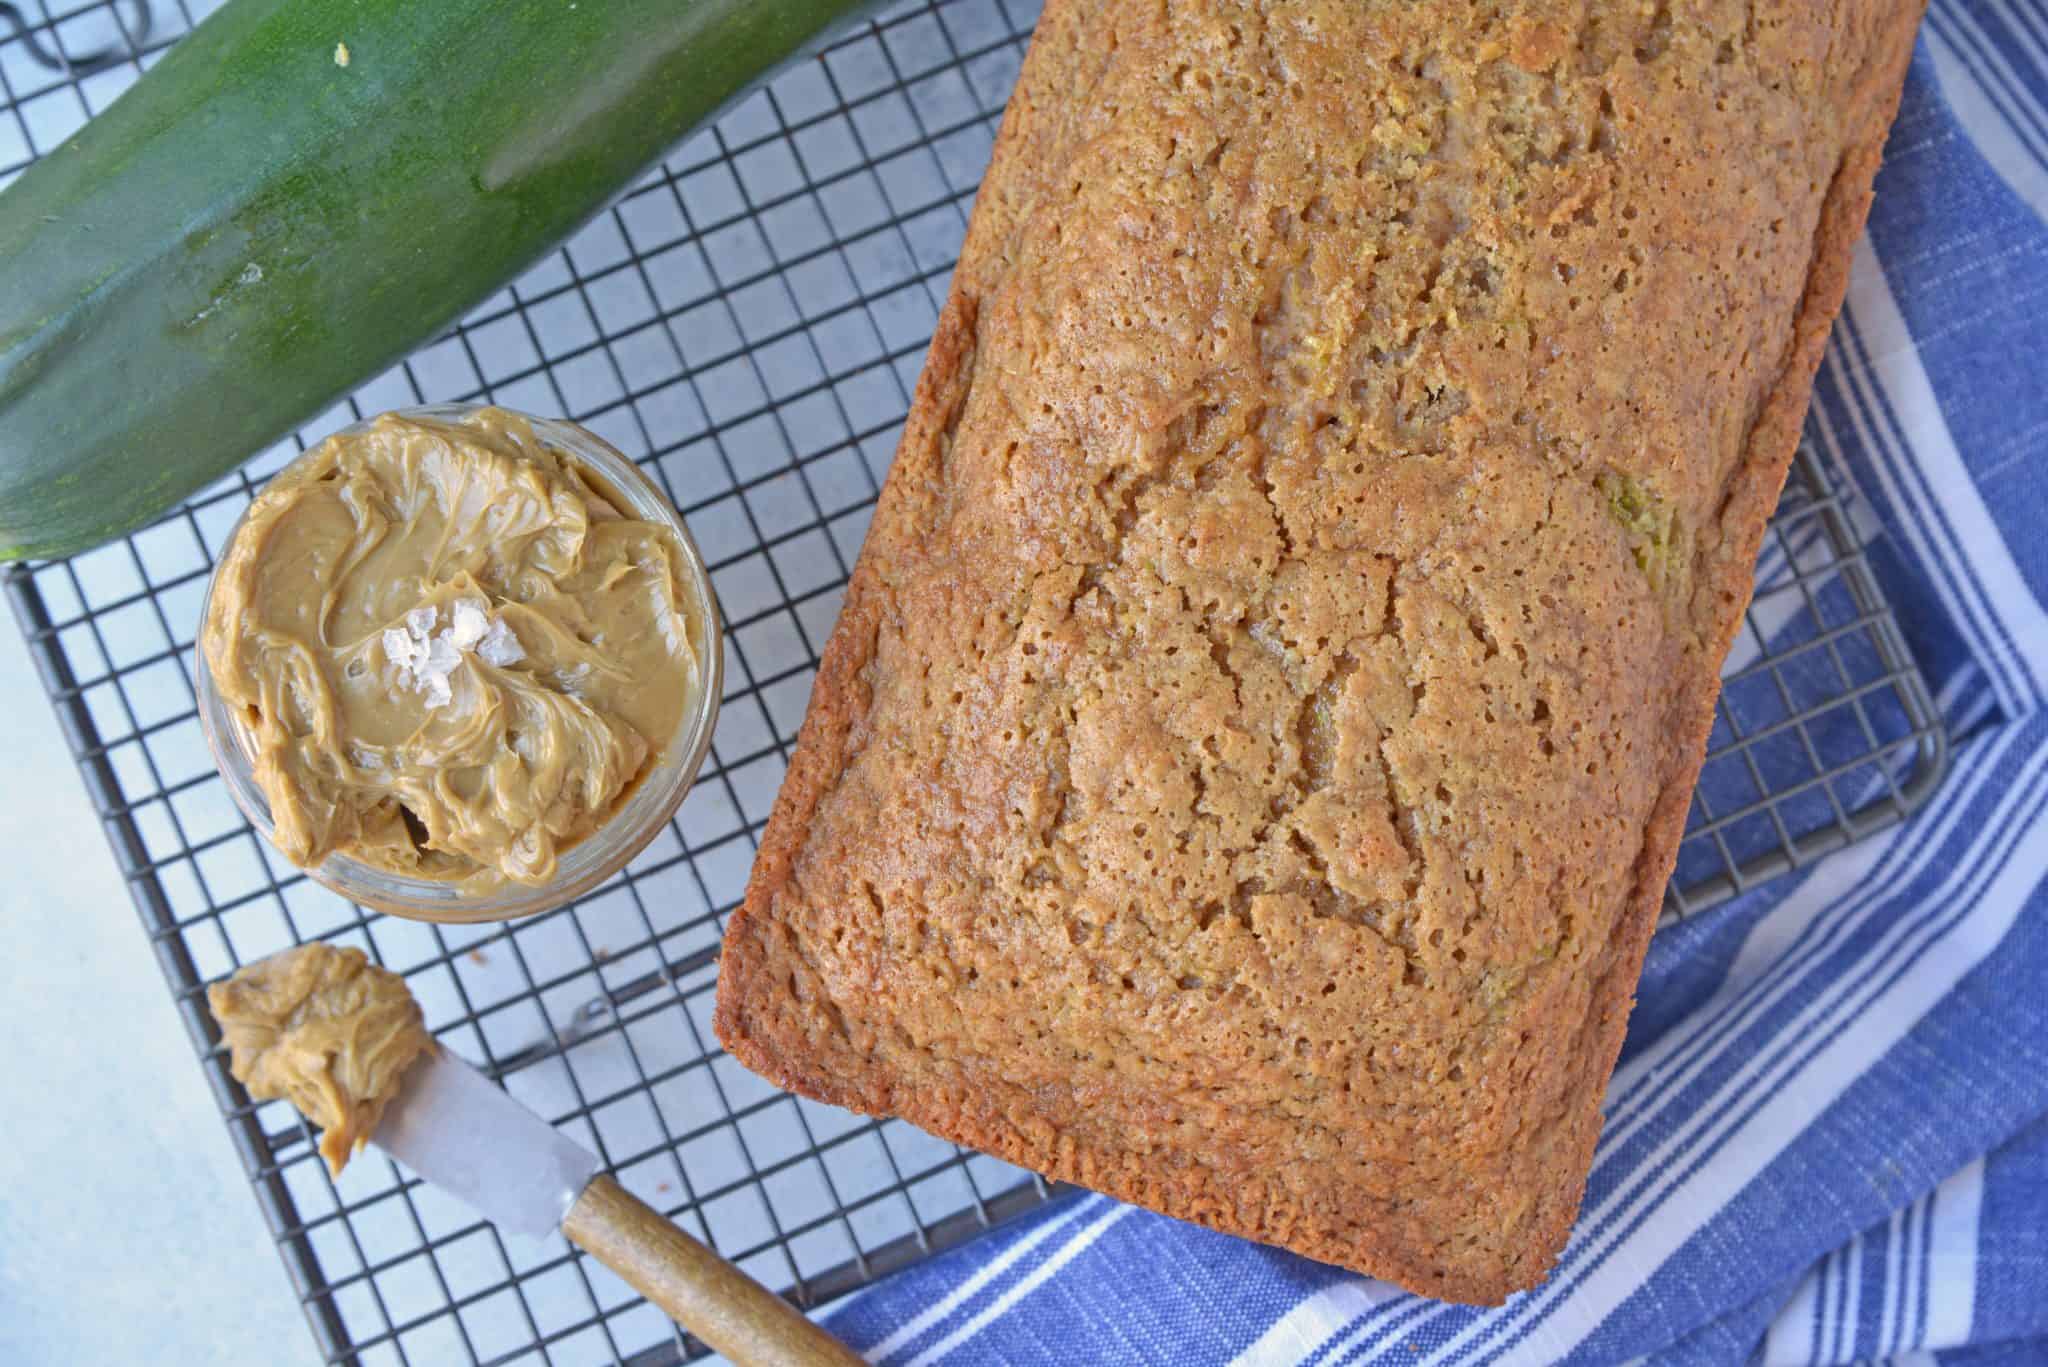 Molasses Butter is the blend of butter, molasses and one secret ingredient that will never guess until see the recipe! Served best on fresh zucchini bread and biscuits! #flavoredbutter #molassesbutter www.savoryexperiments.com 